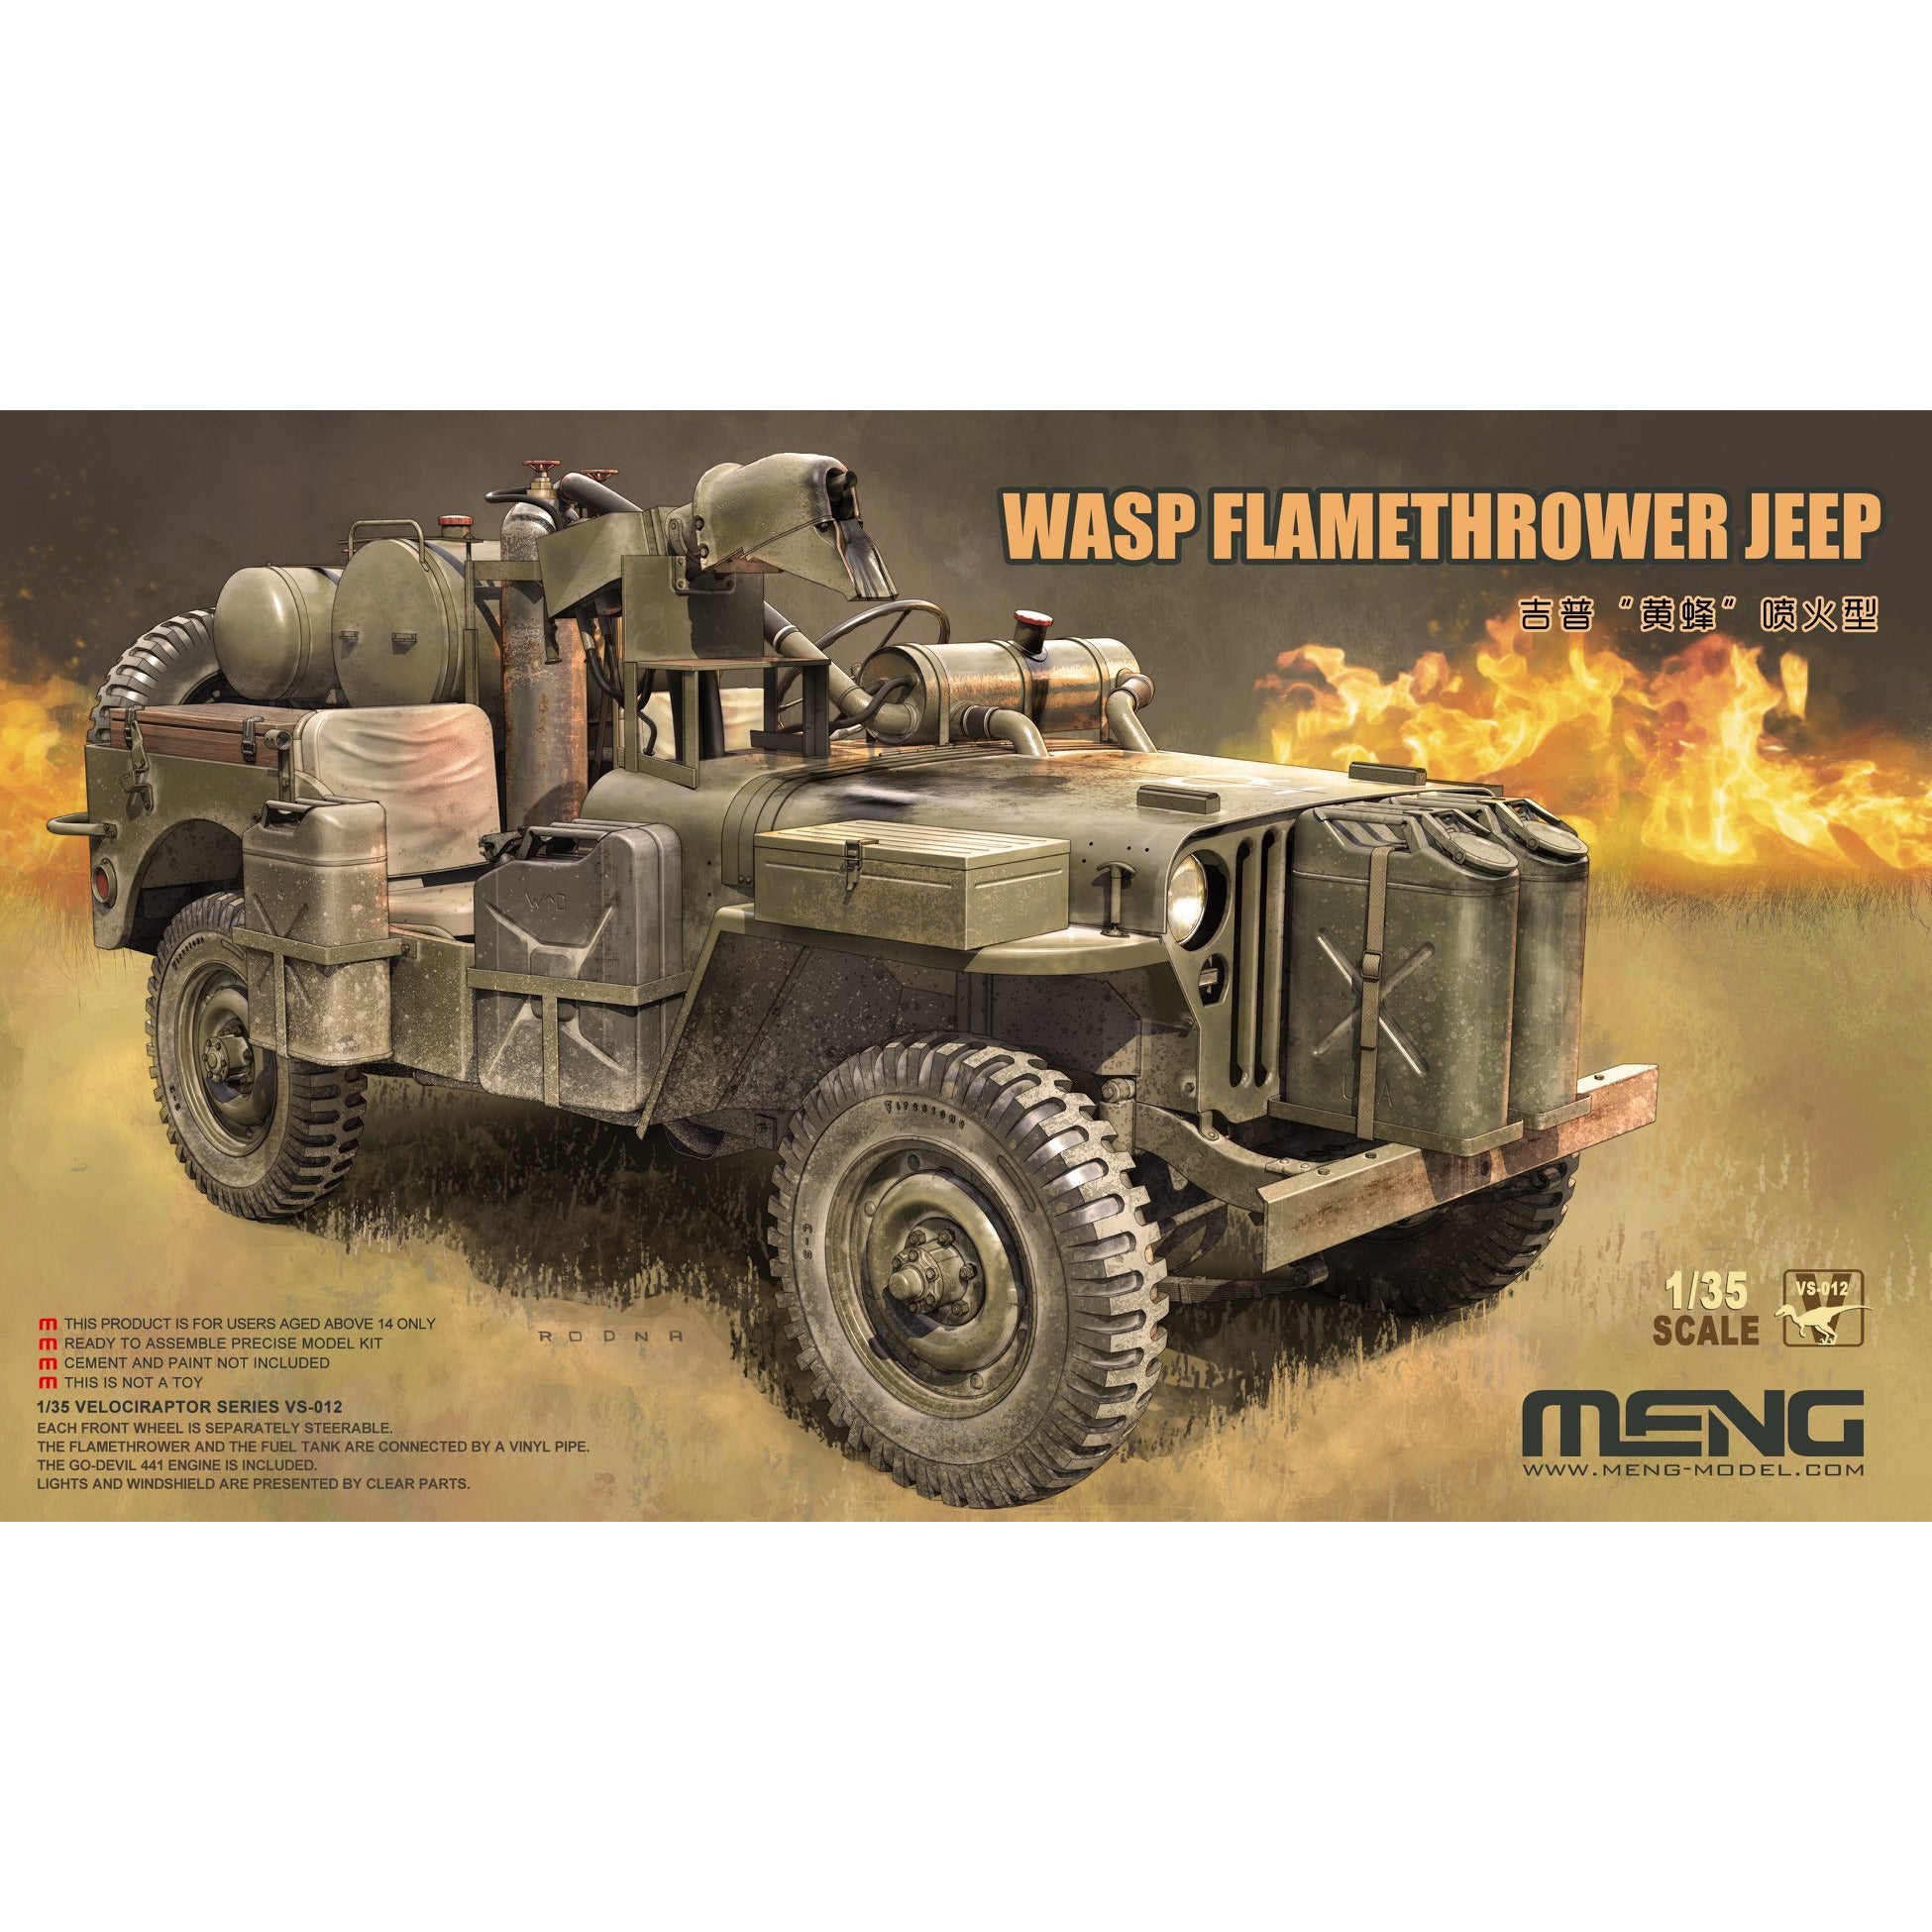 Wasp Flamethrower Jeep 1/35 by Meng